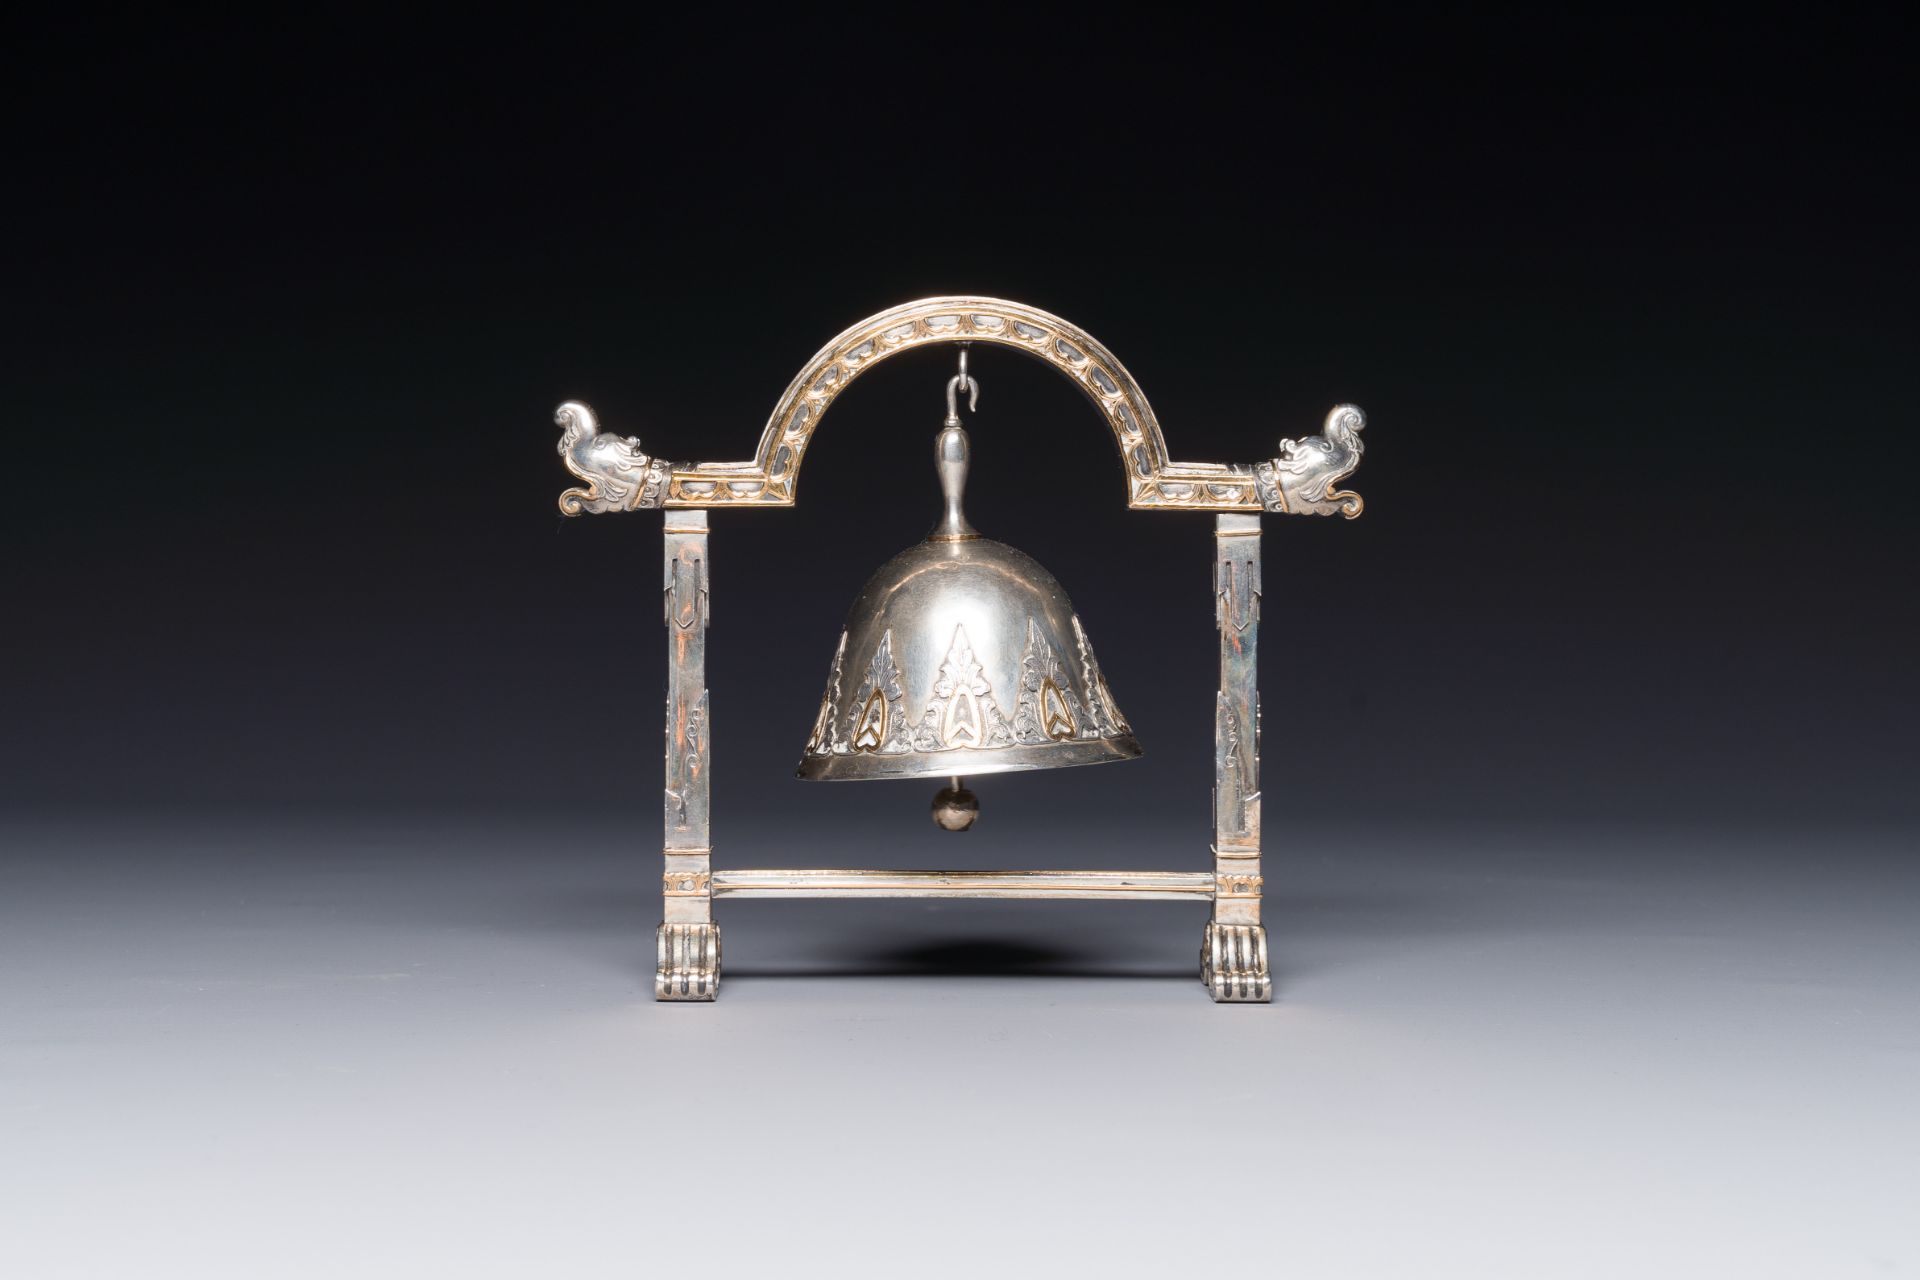 A fine parcel-gilt silver table bell or miniature gong, Southeast Asia, early 20th C. - Image 4 of 12